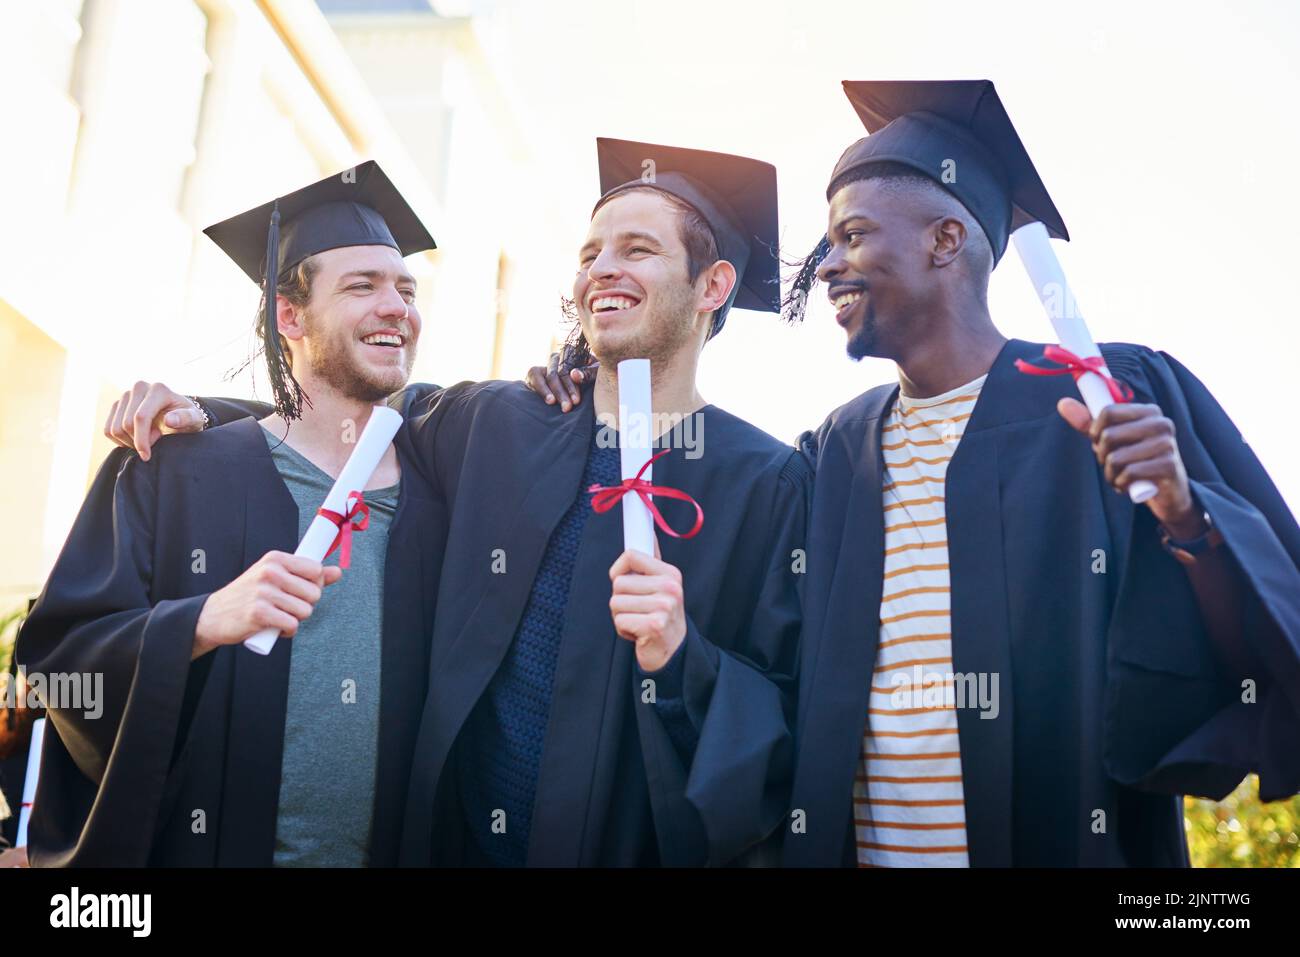 College was the best time of our lives. students on graduation day from university. Stock Photo